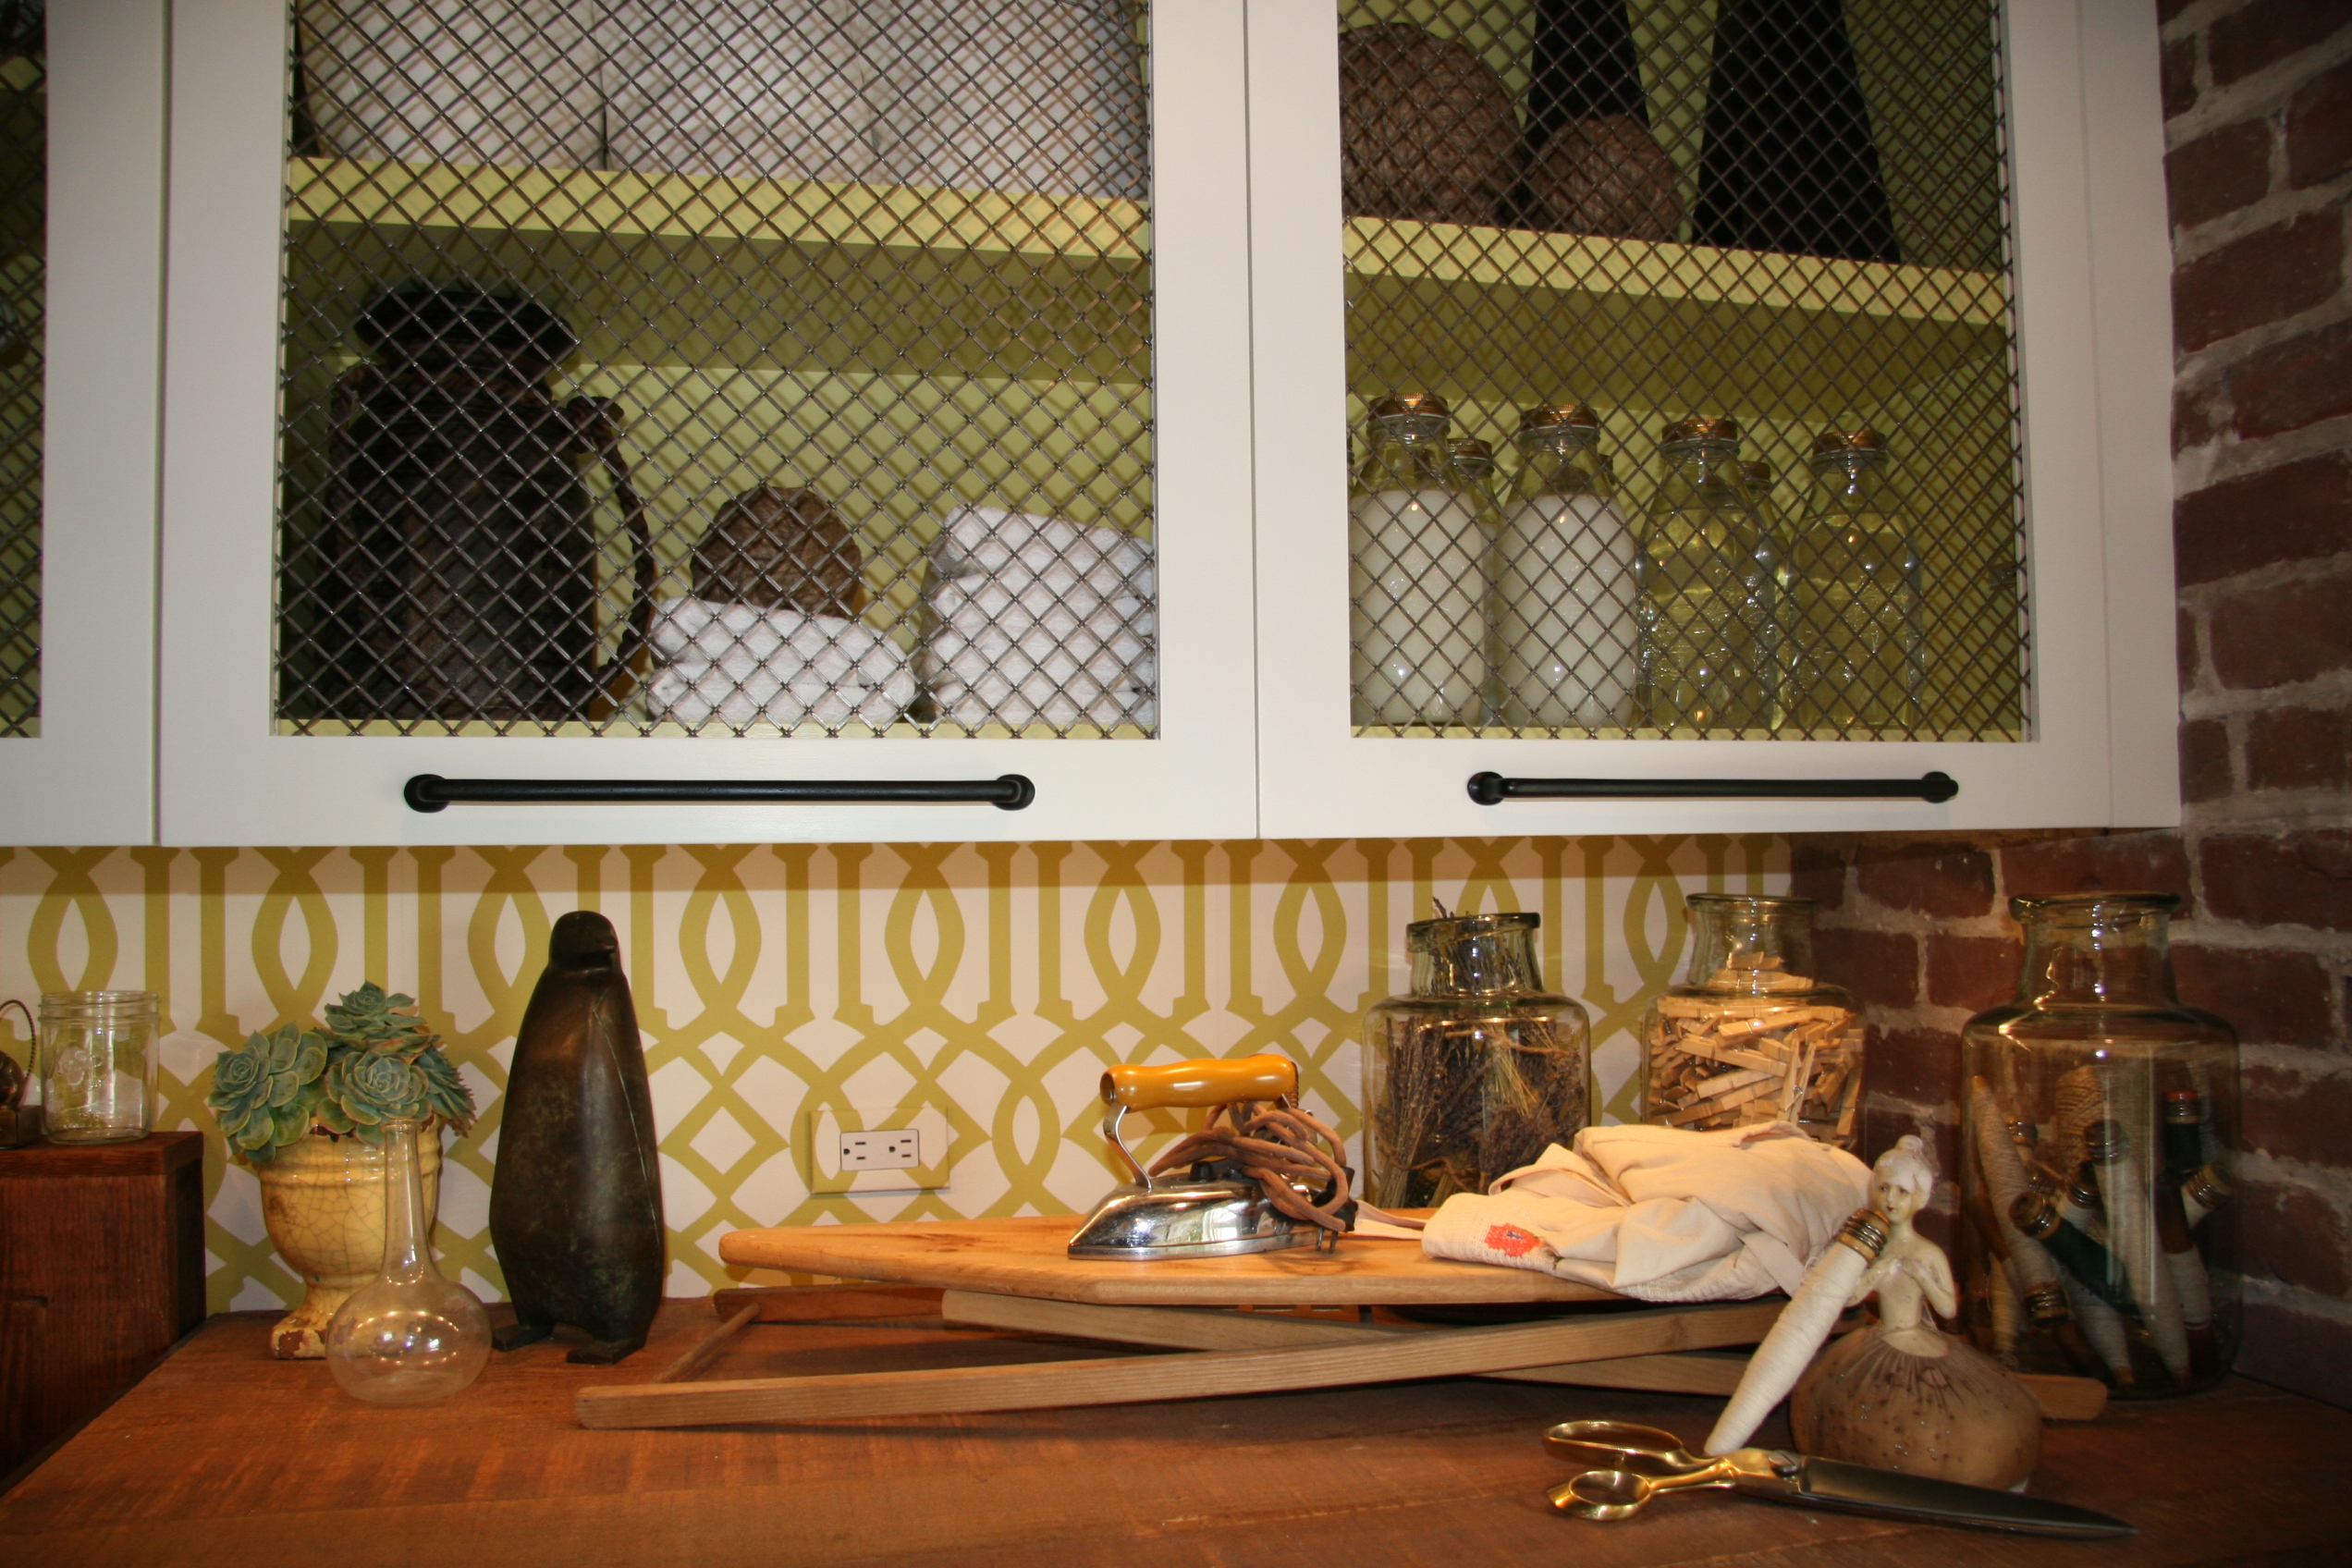 Trellis Wallpaper Played Well With Rustic Elements Like Chicken Wire